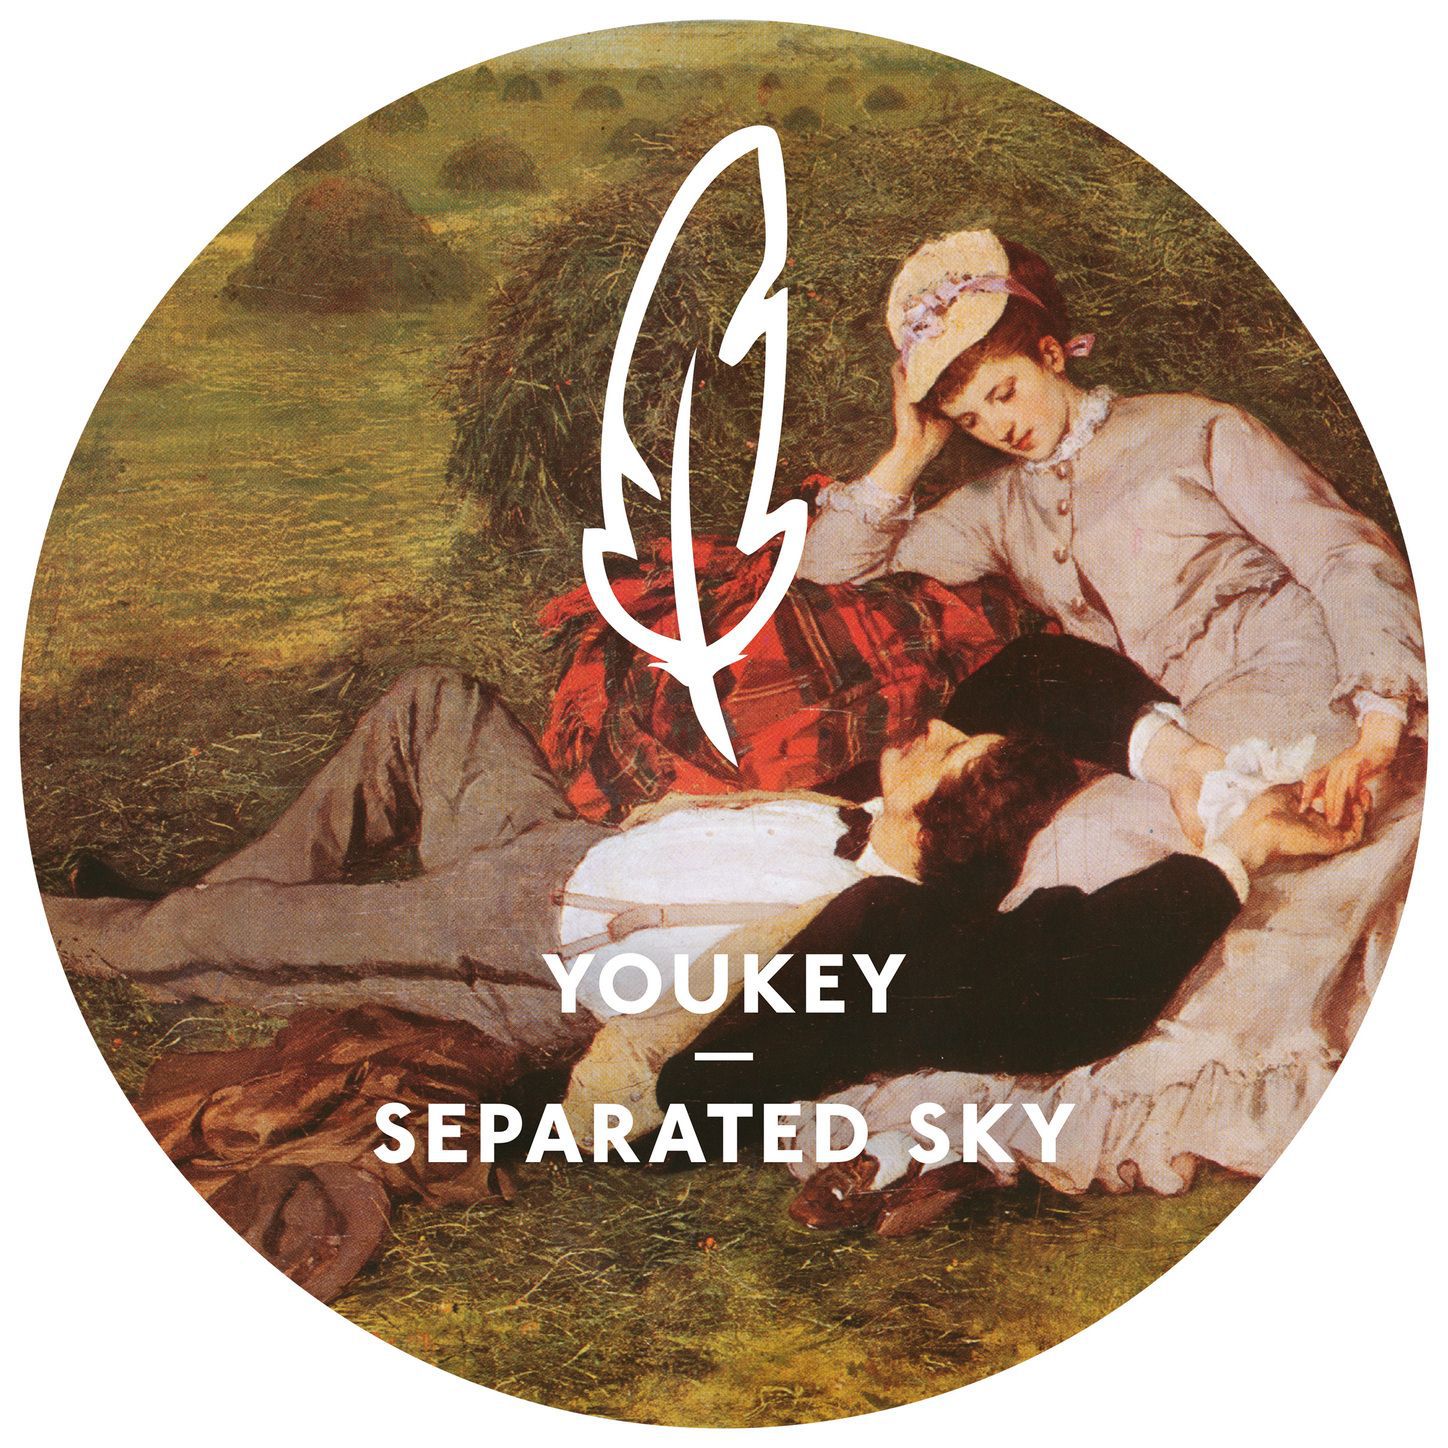 00-Youkey-Separated Sky-2015-